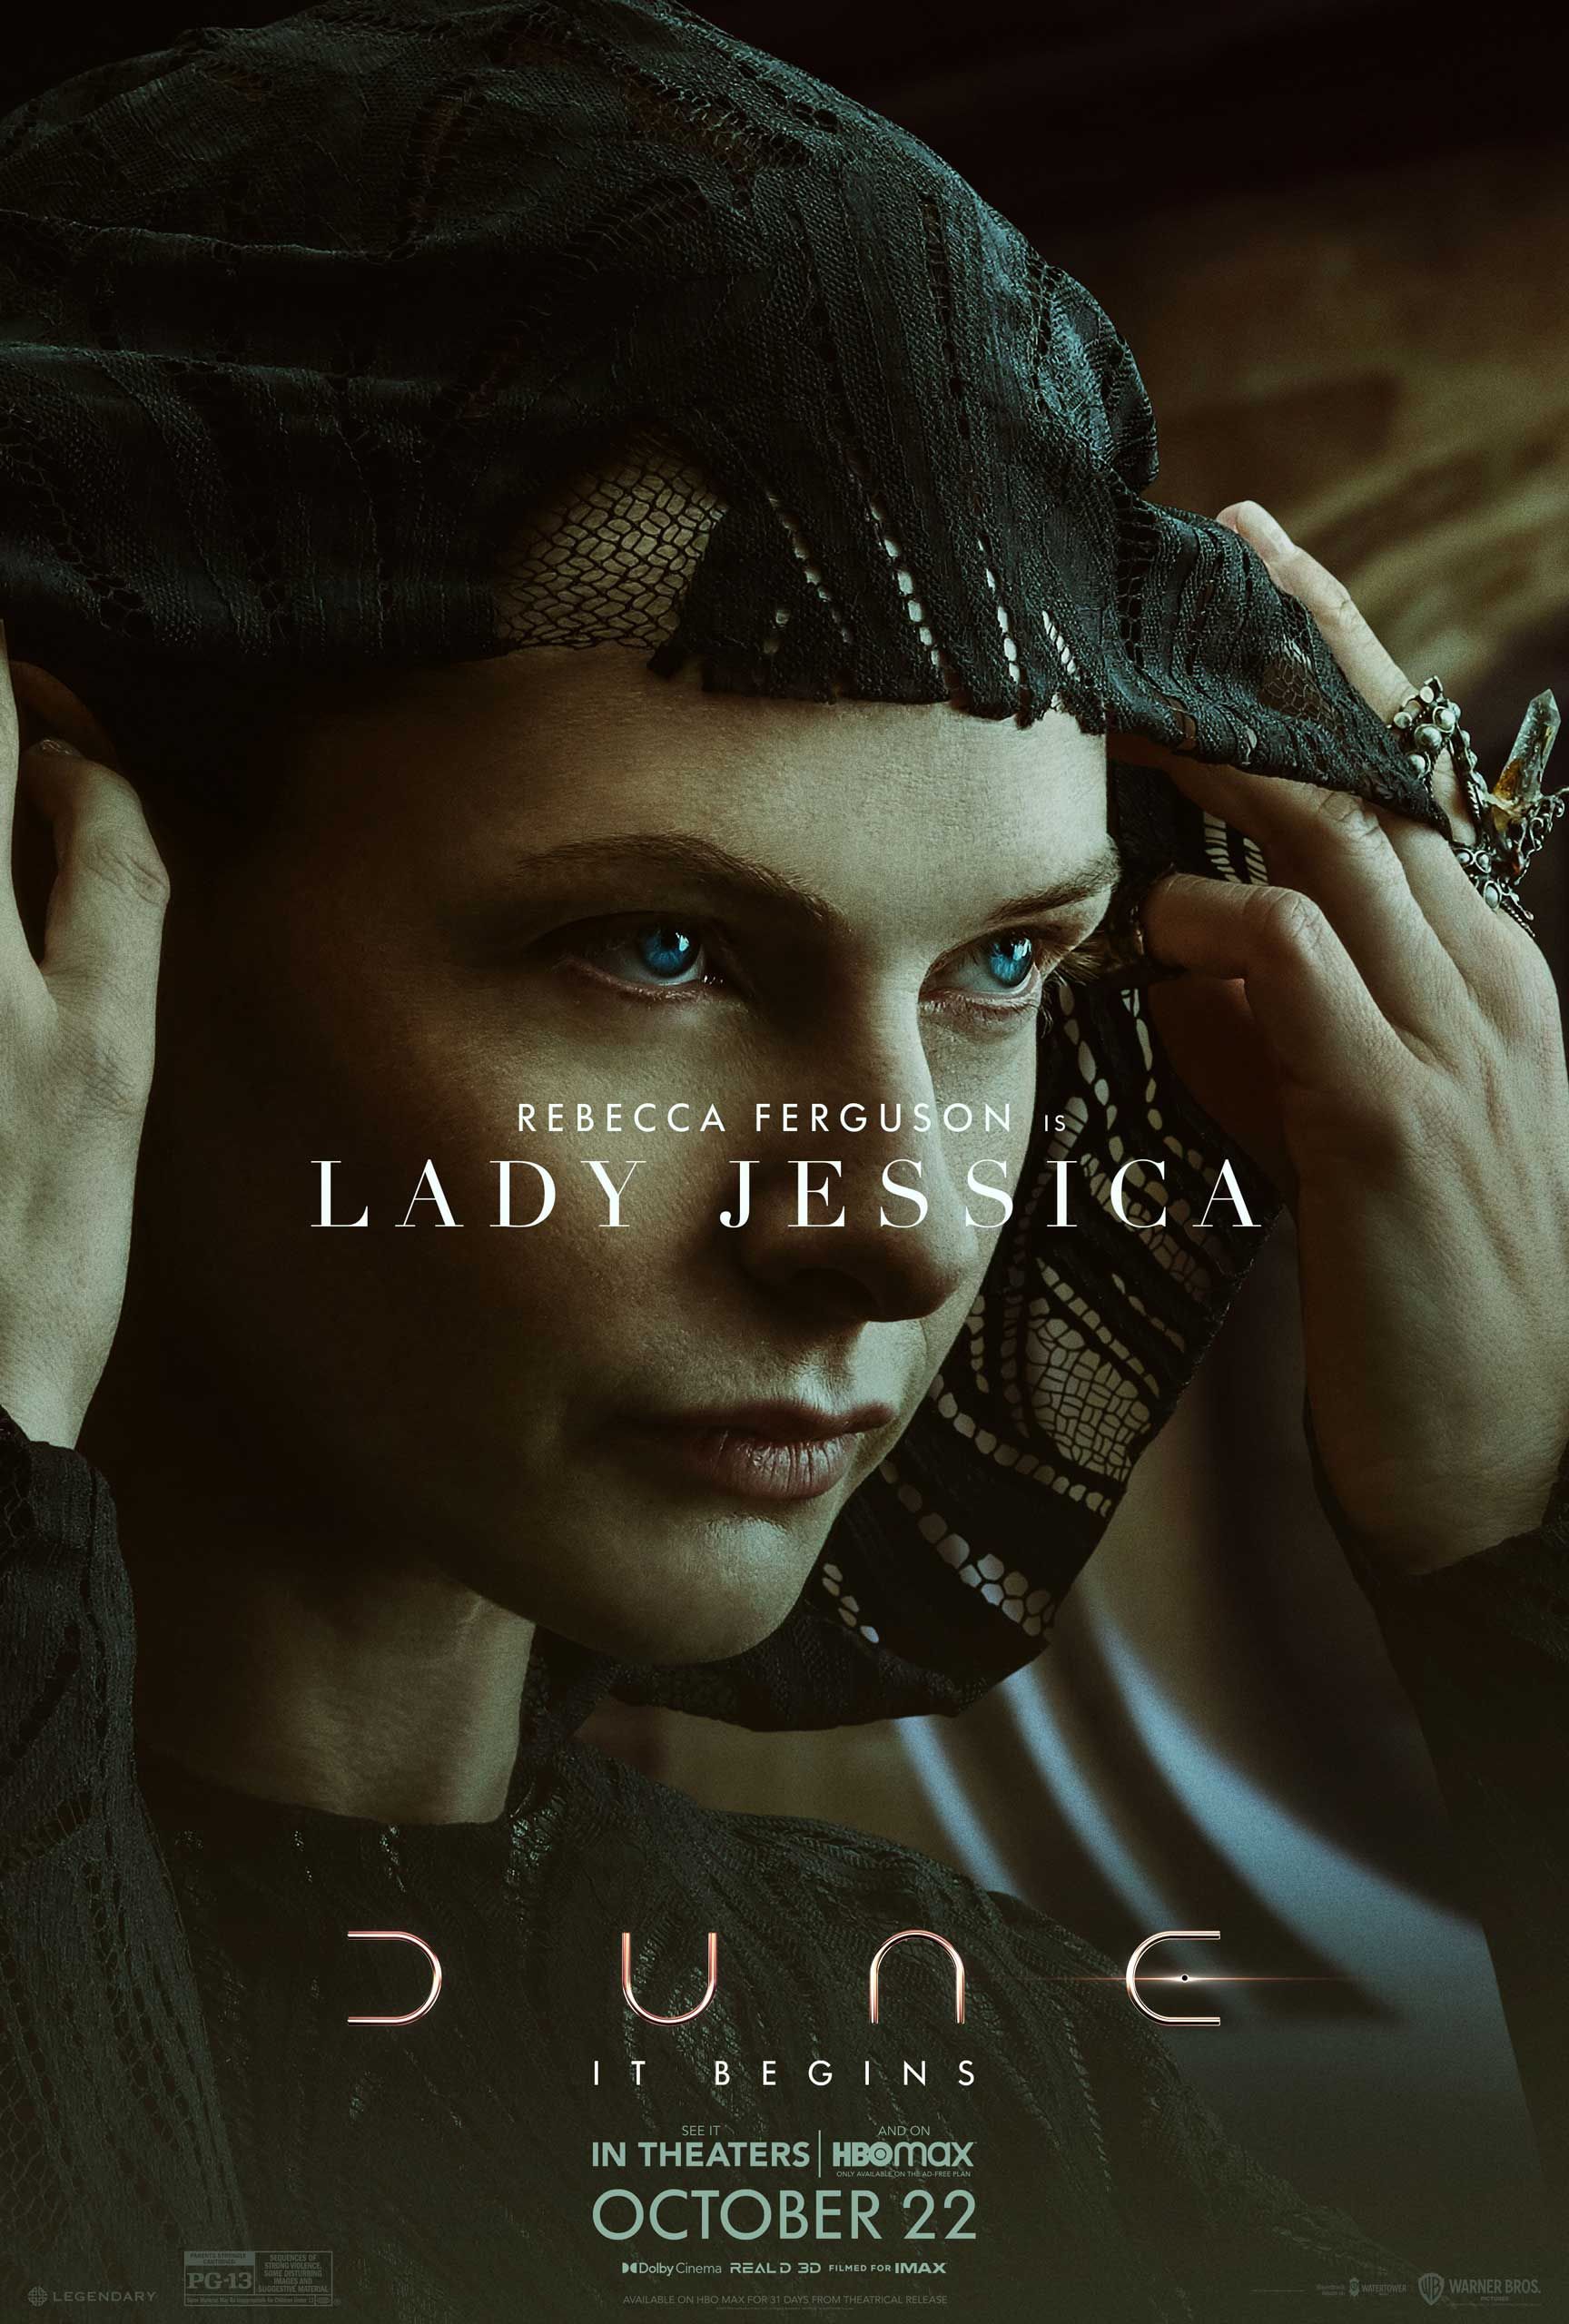 Dune 2021 Lady Jessica character poster